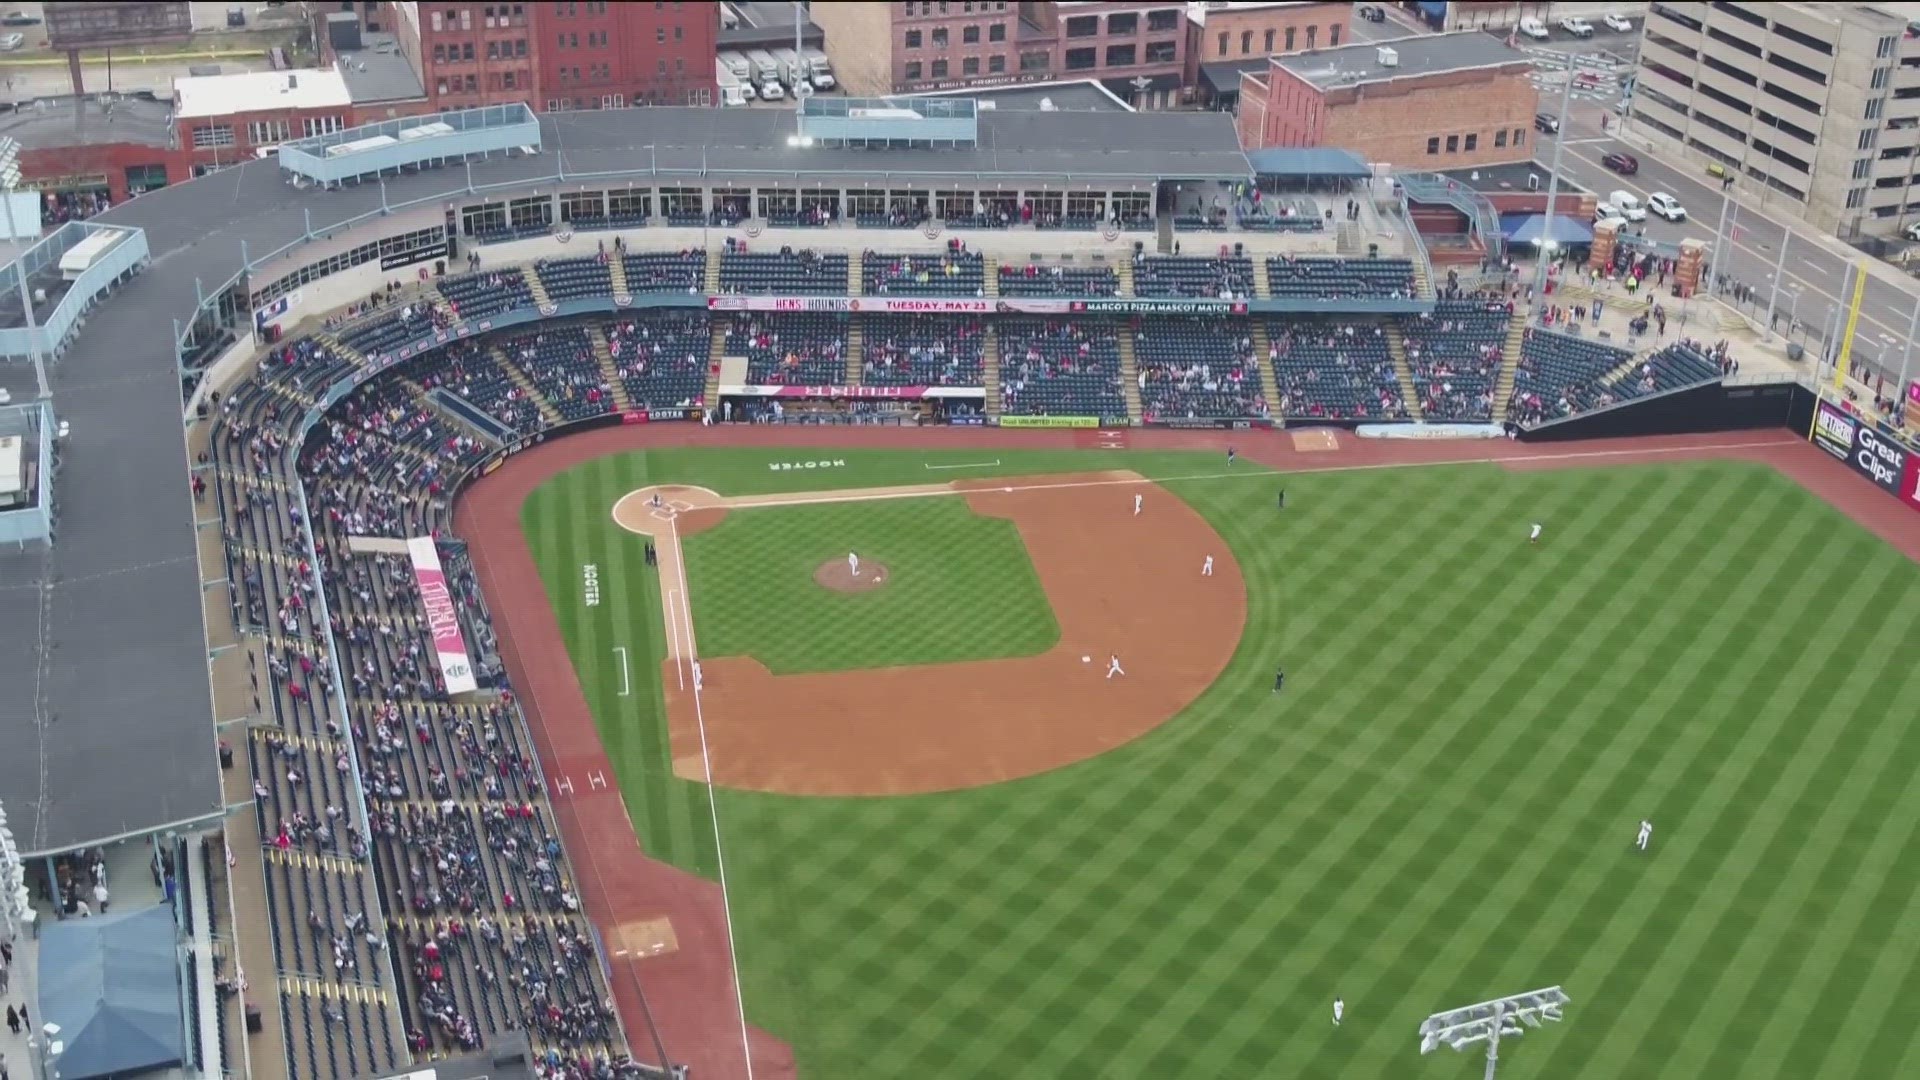 The Mud Hens kick off the season Friday against the Nashville Sounds at 4 p.m.